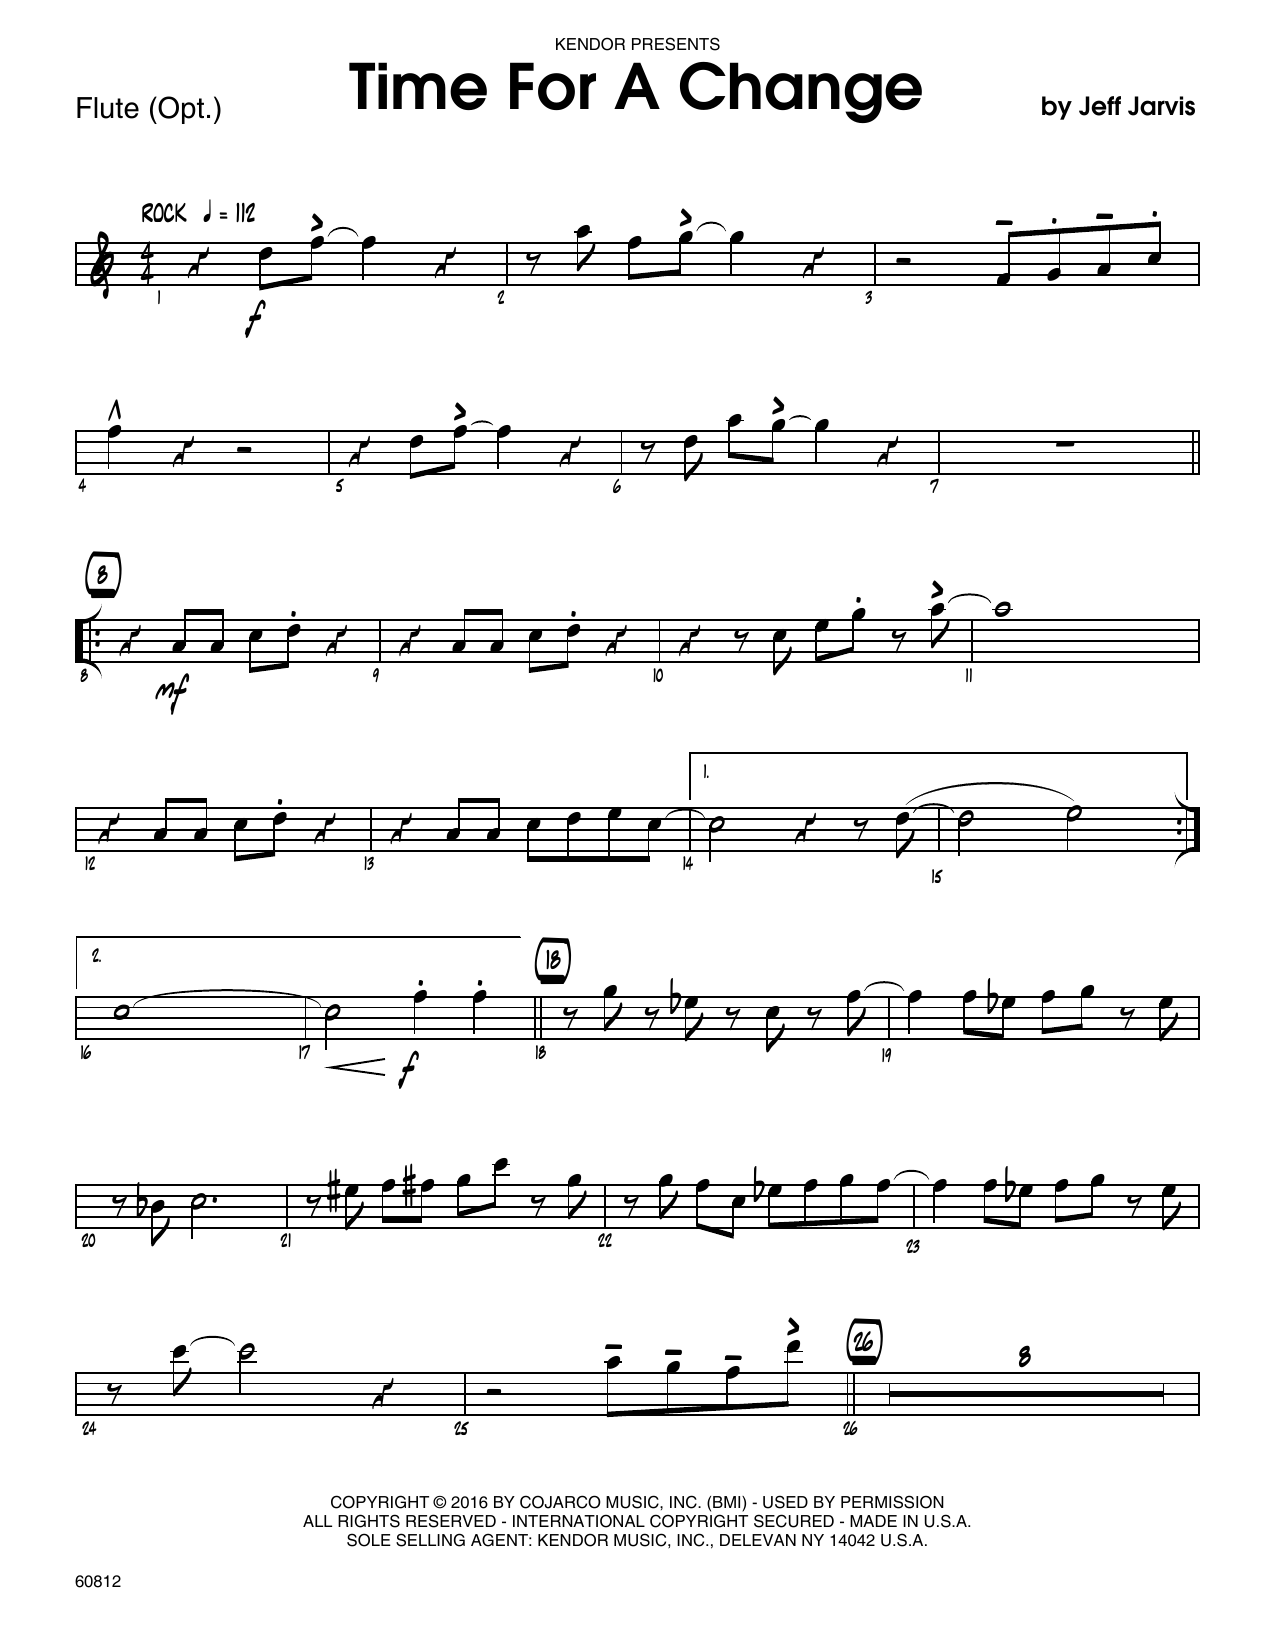 Download Jeff Jarvis Time For A Change - Flute Sheet Music